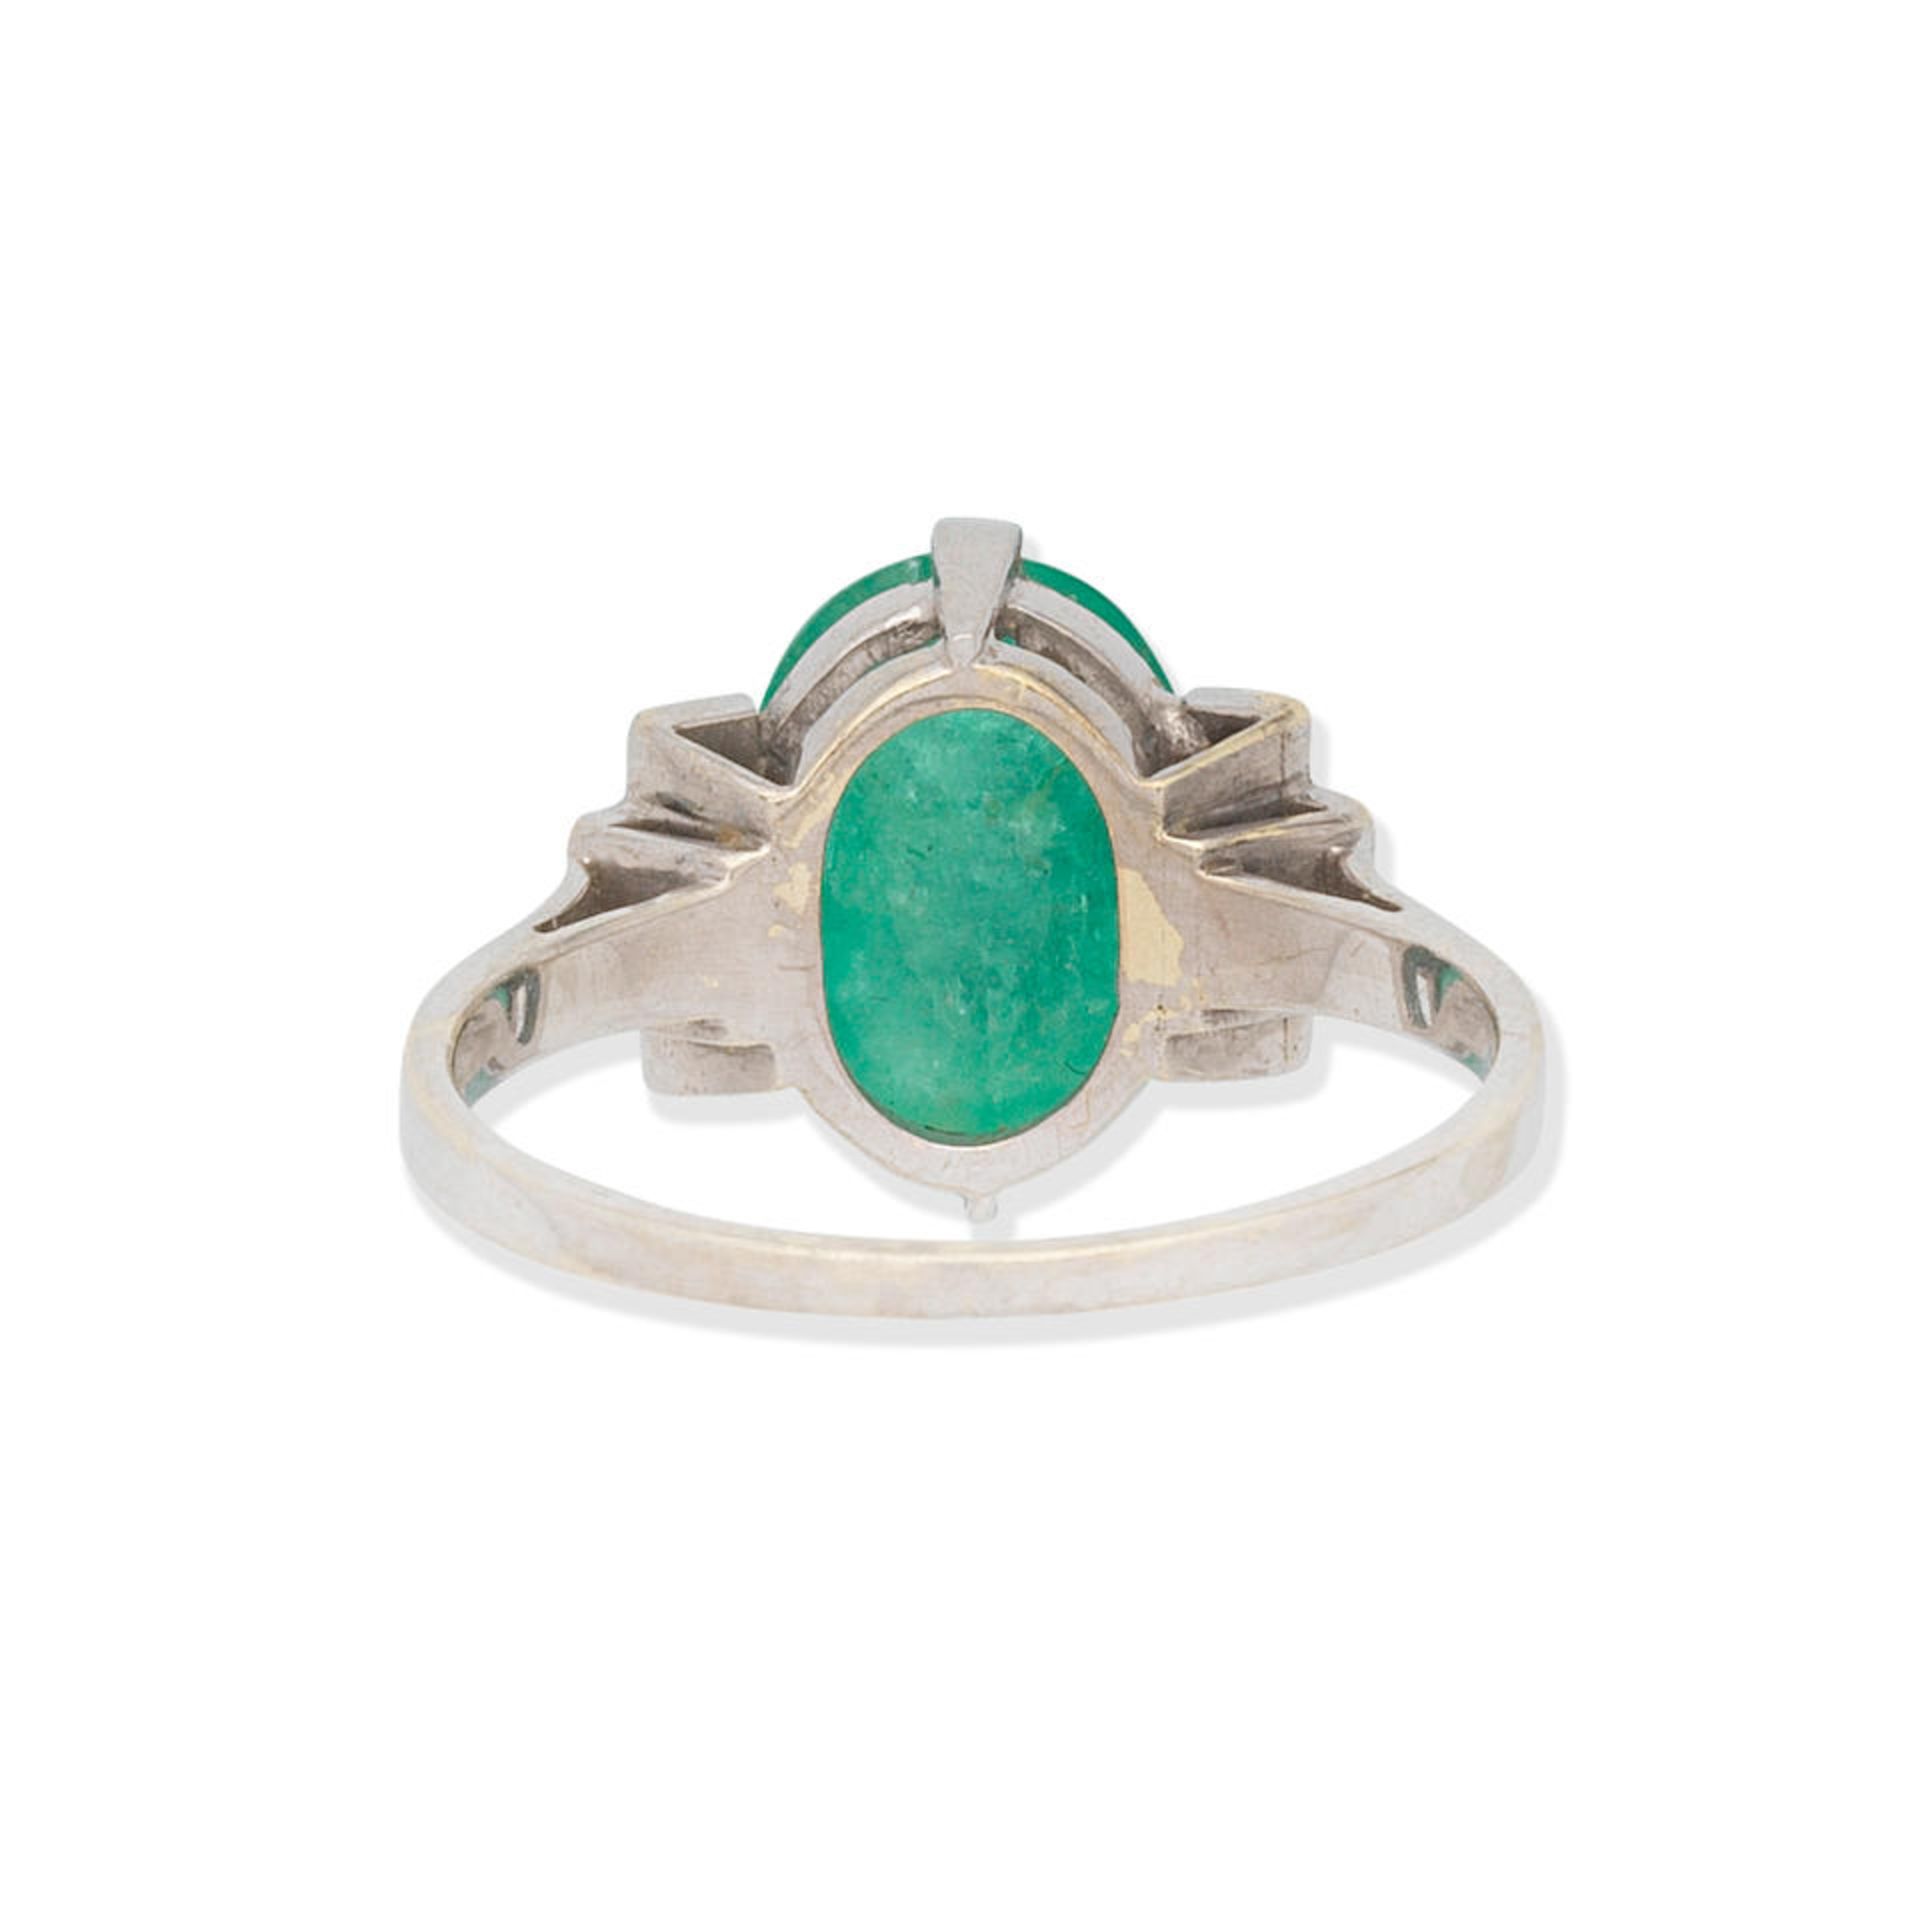 EMERALD AND DIAMOND RING - Image 2 of 3